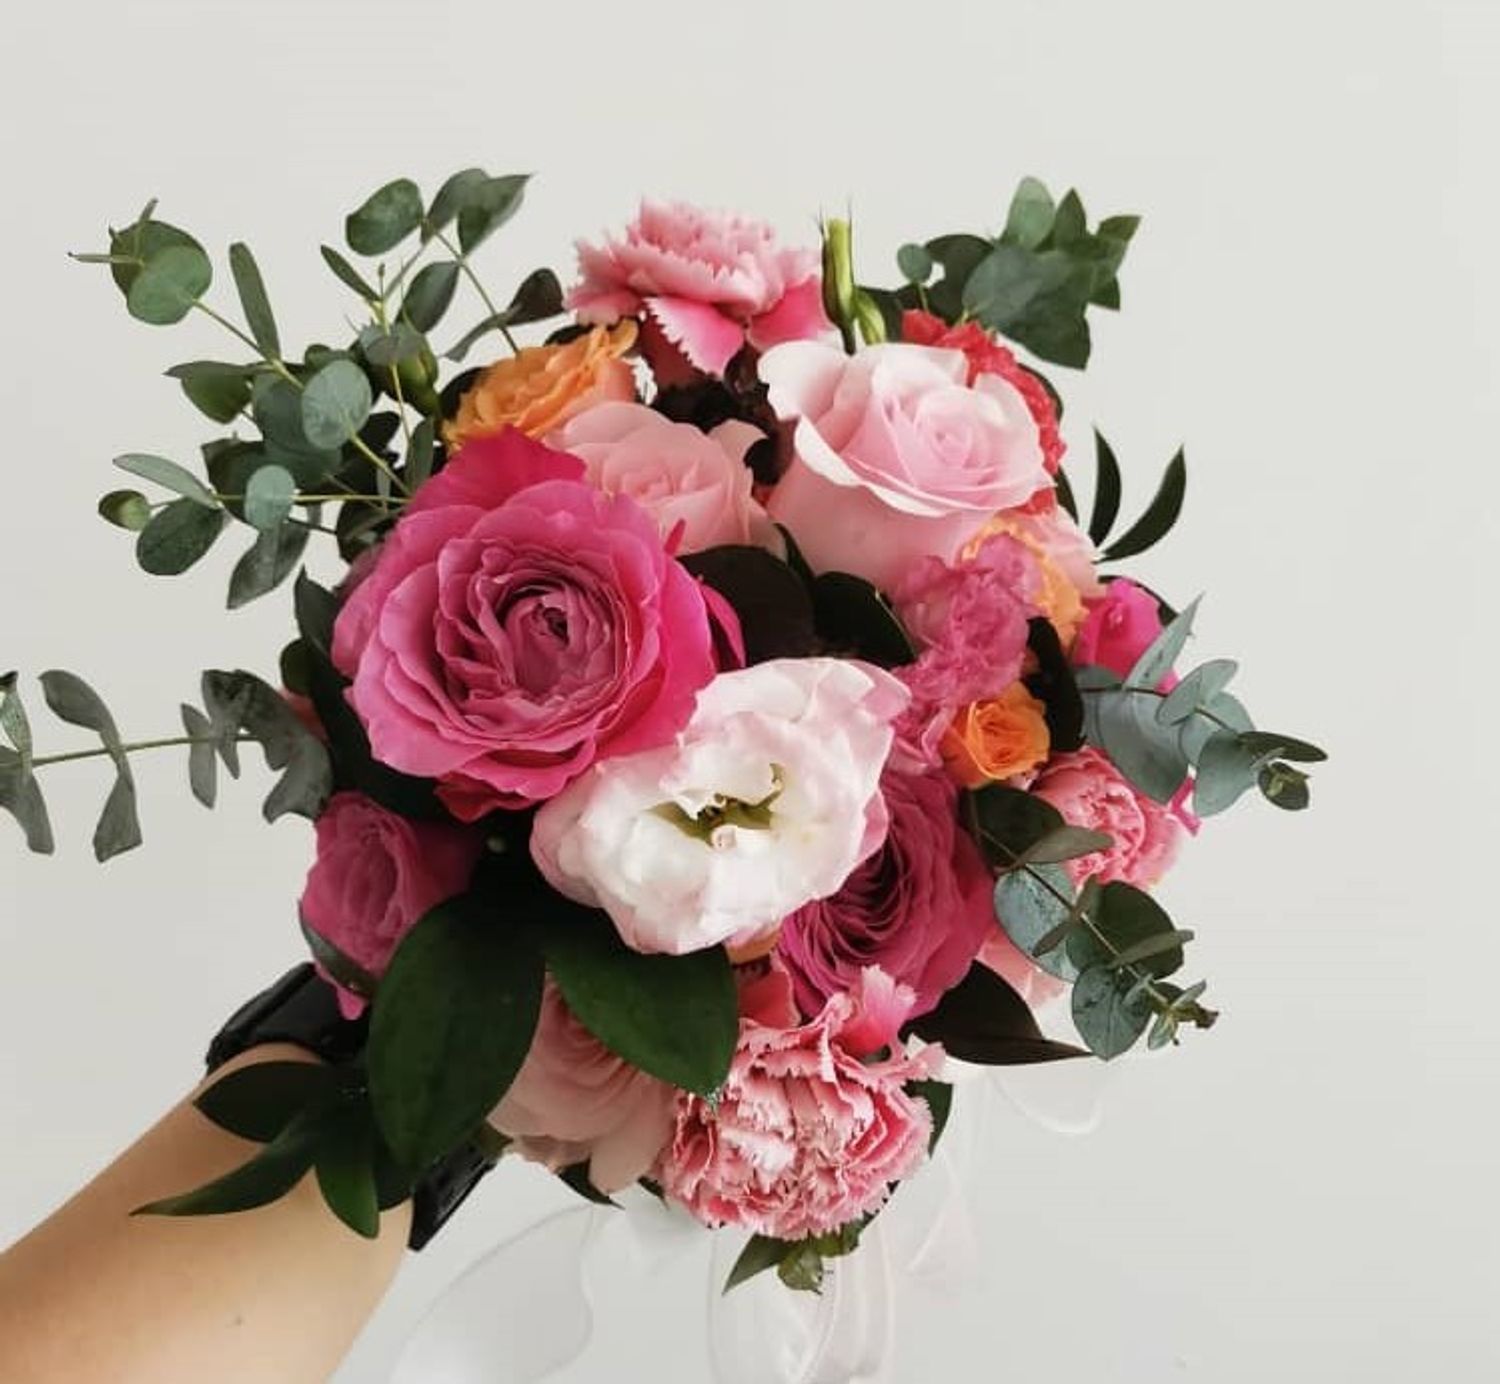 Yoake Florist | Best Online Florist in KL | Same Day Delivery | Premium Floral Arrangement | Would You Married Me?